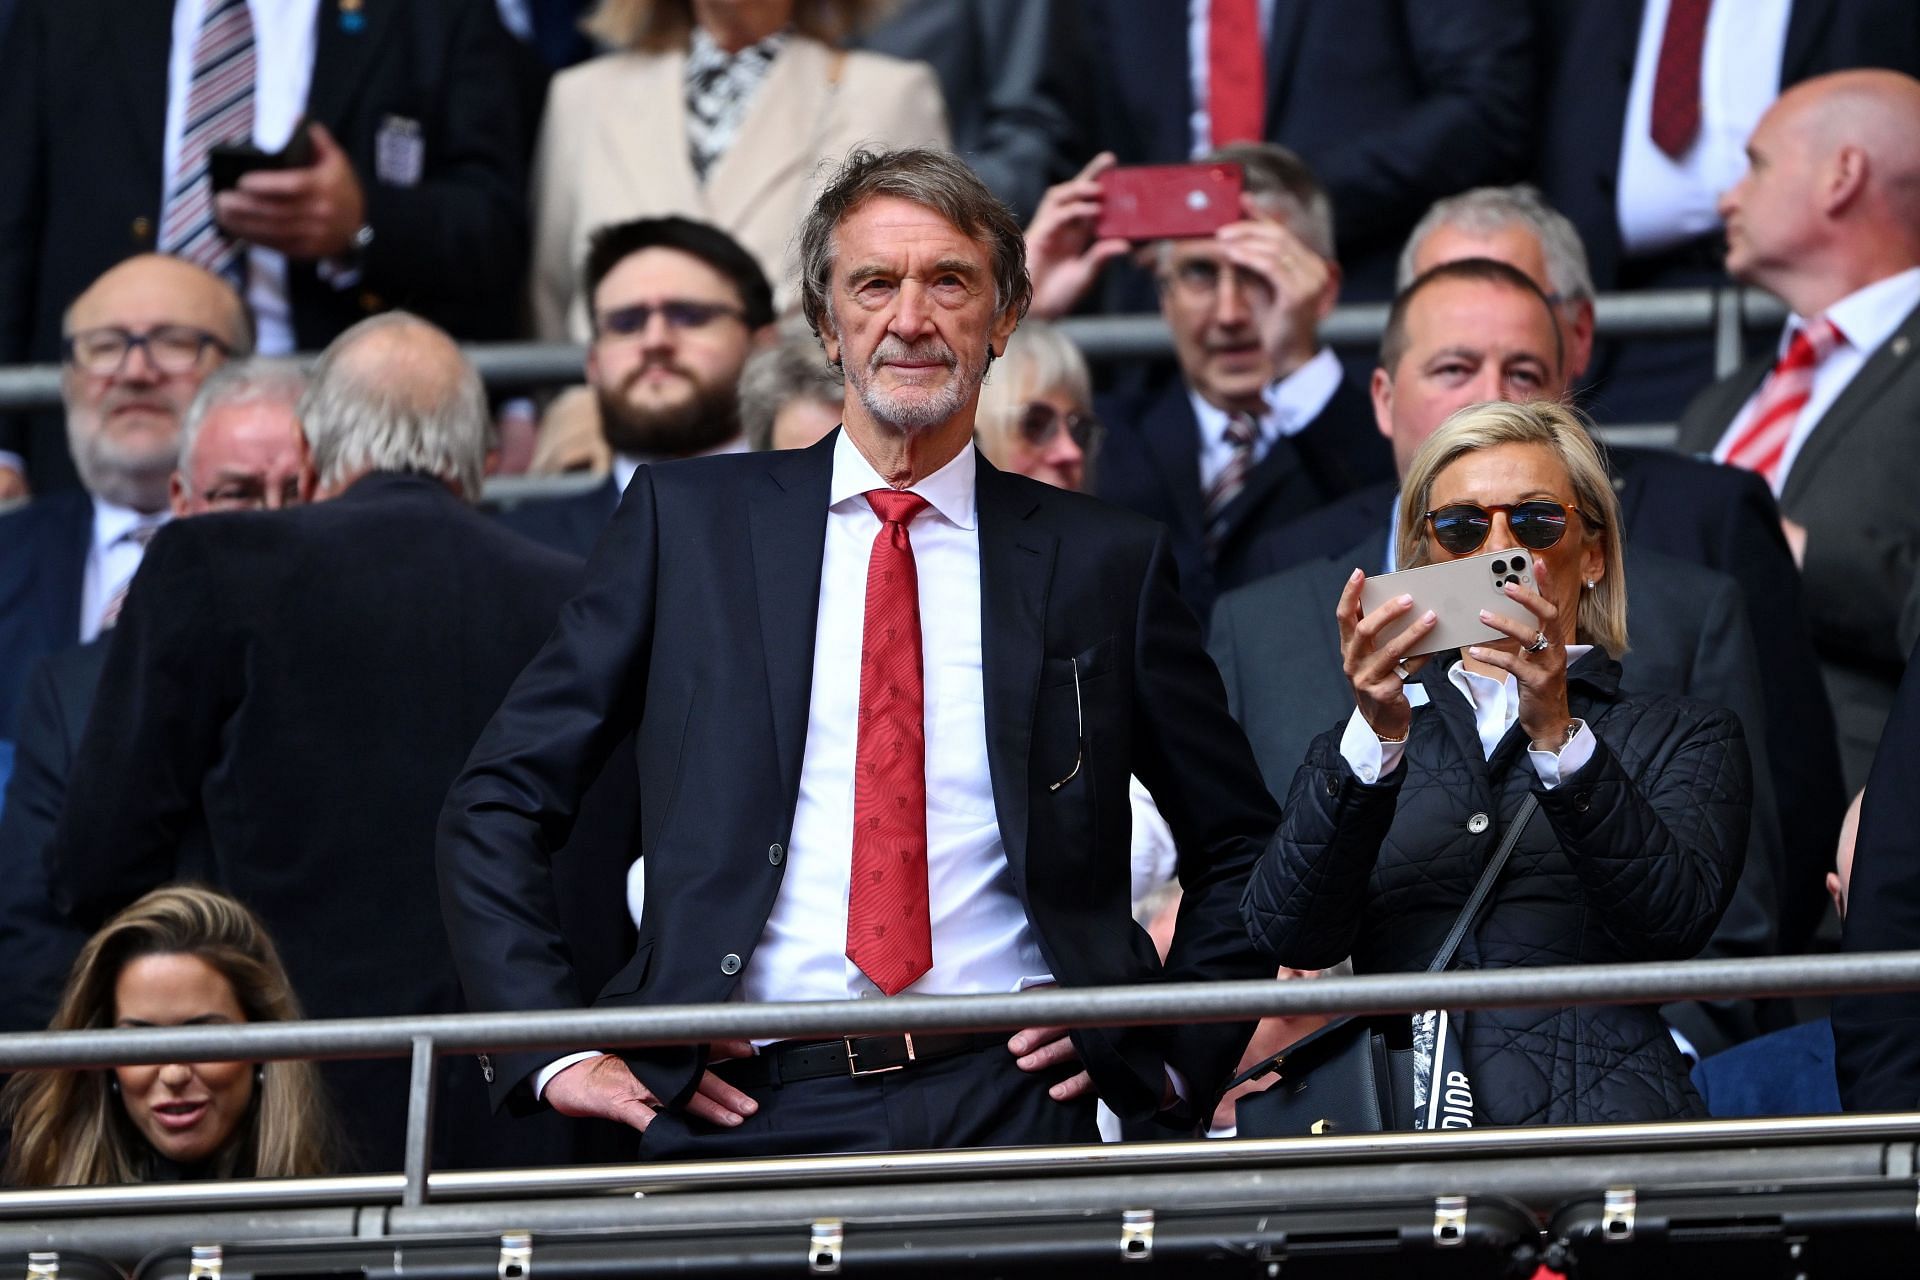 Sir Jim Ratcliffe compares stark contrast in transfer expenditure between Manchester United and Real Madrid